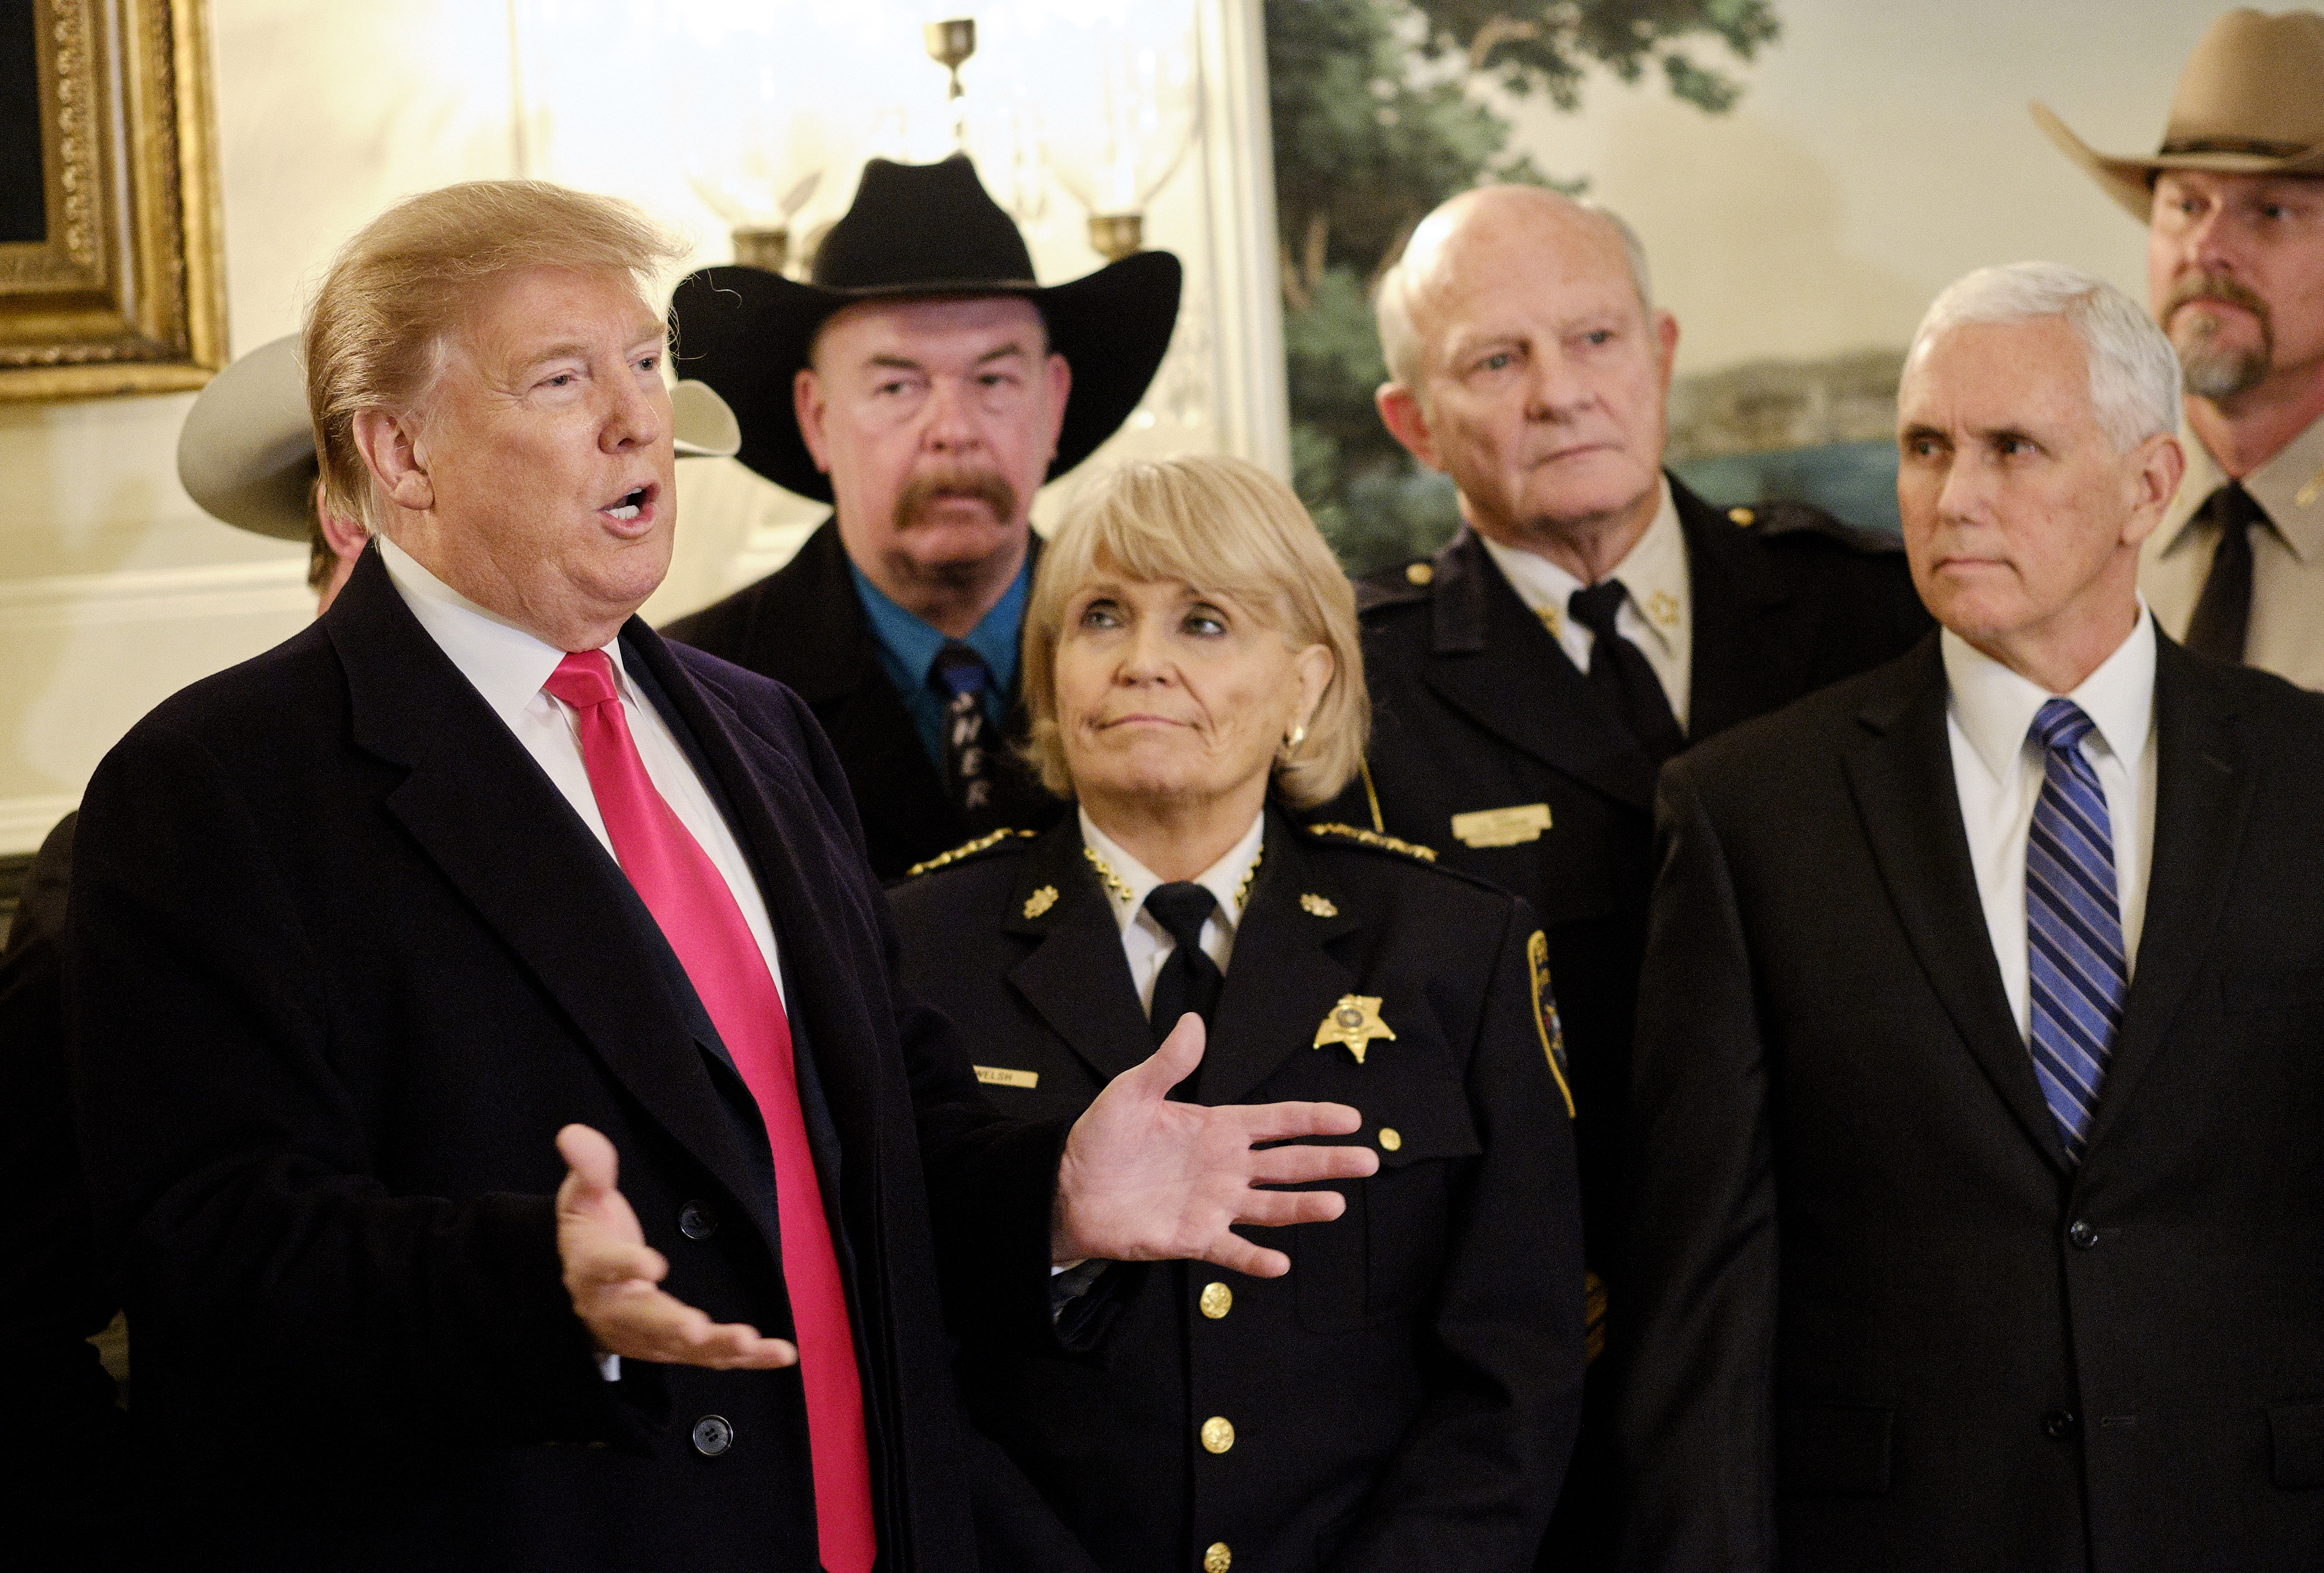 epa07363174 US President Donald J. Trump (L), with US Vice President Mike Pence (R), speaks to the press after meeting with sheriffs from across the country before departing for a rally in Texas, in the Diplomatic Reception Room at the White House in Washington, DC, USA, on 11 February 2019.  EPA/T.J. Kirkpatrick / Bloomberg POOL